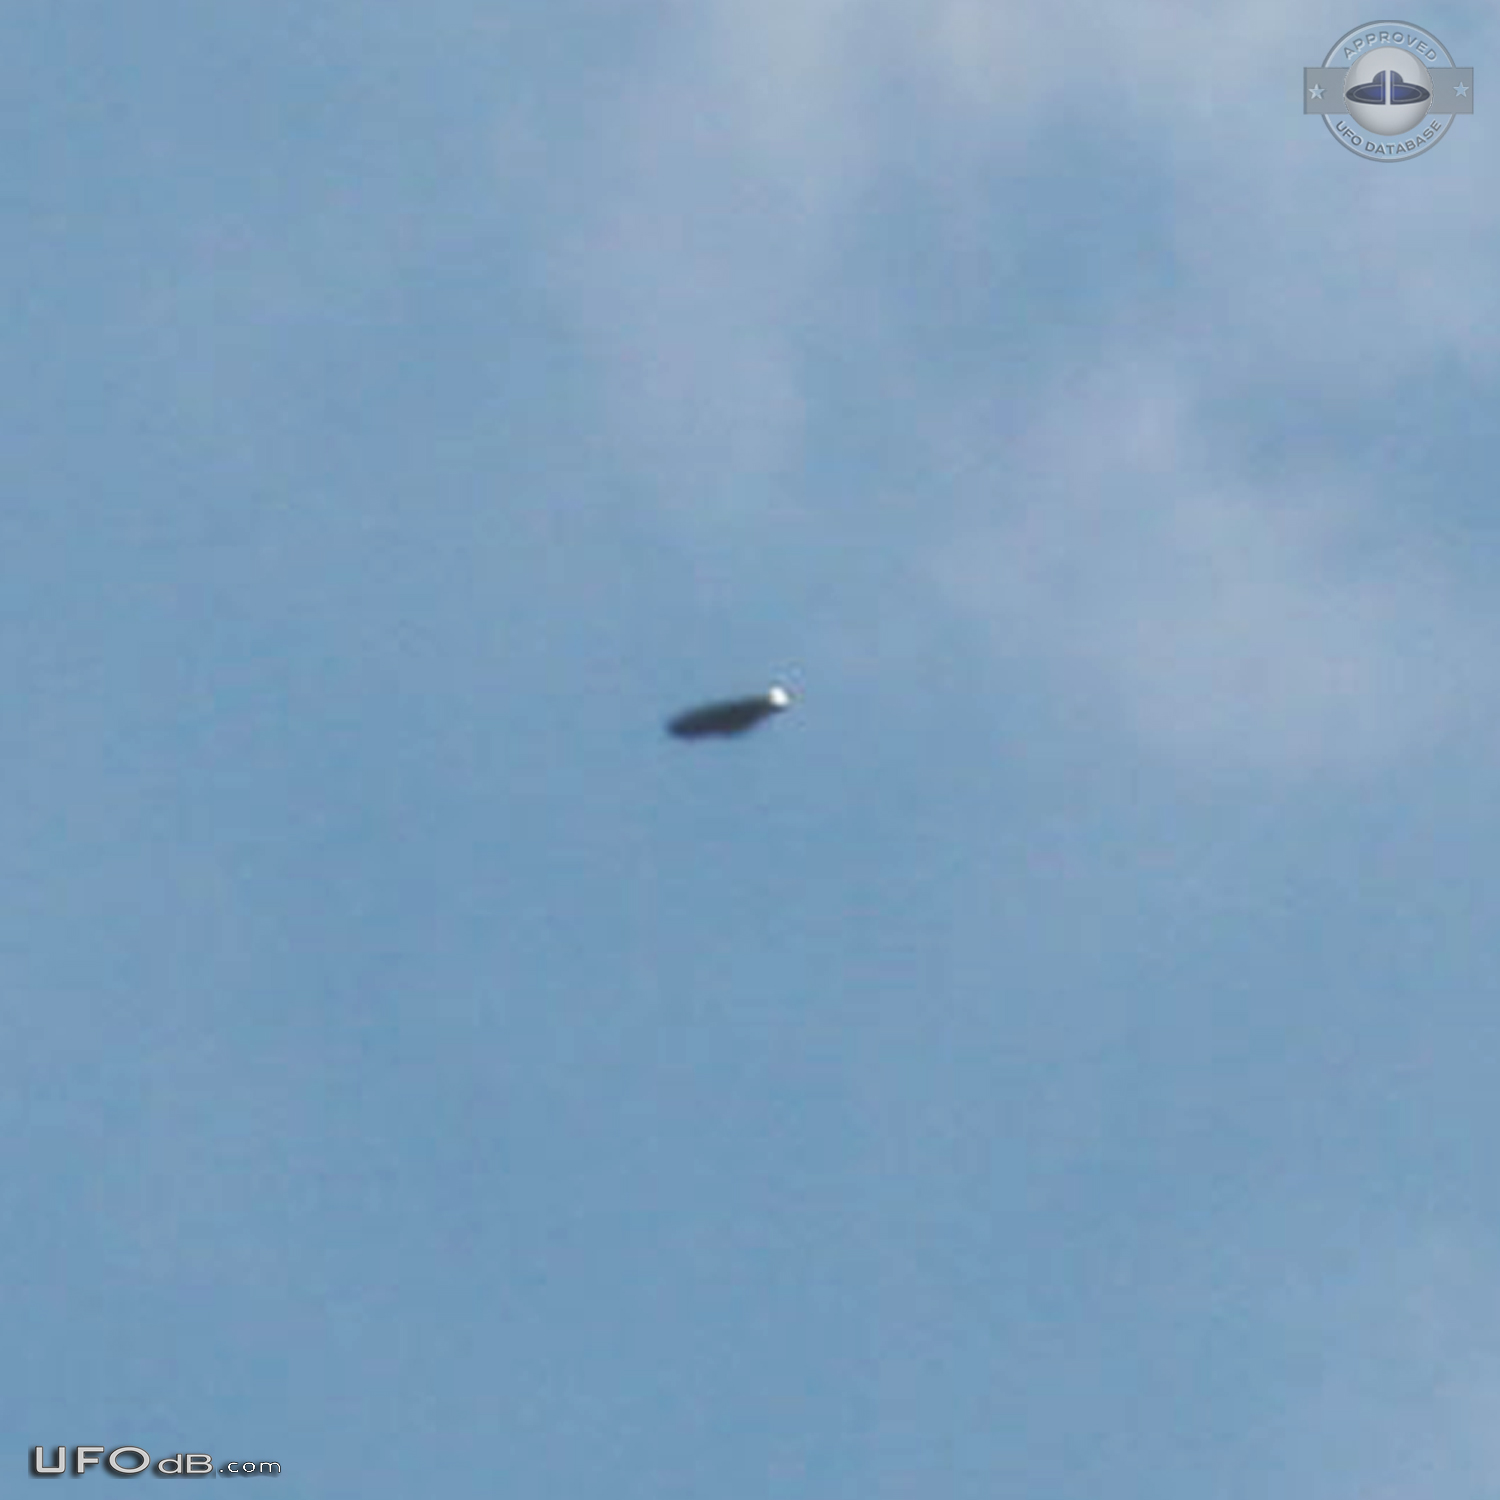 Watched UFO first in the west move quickly through to north east - Gle UFO Picture #740-8